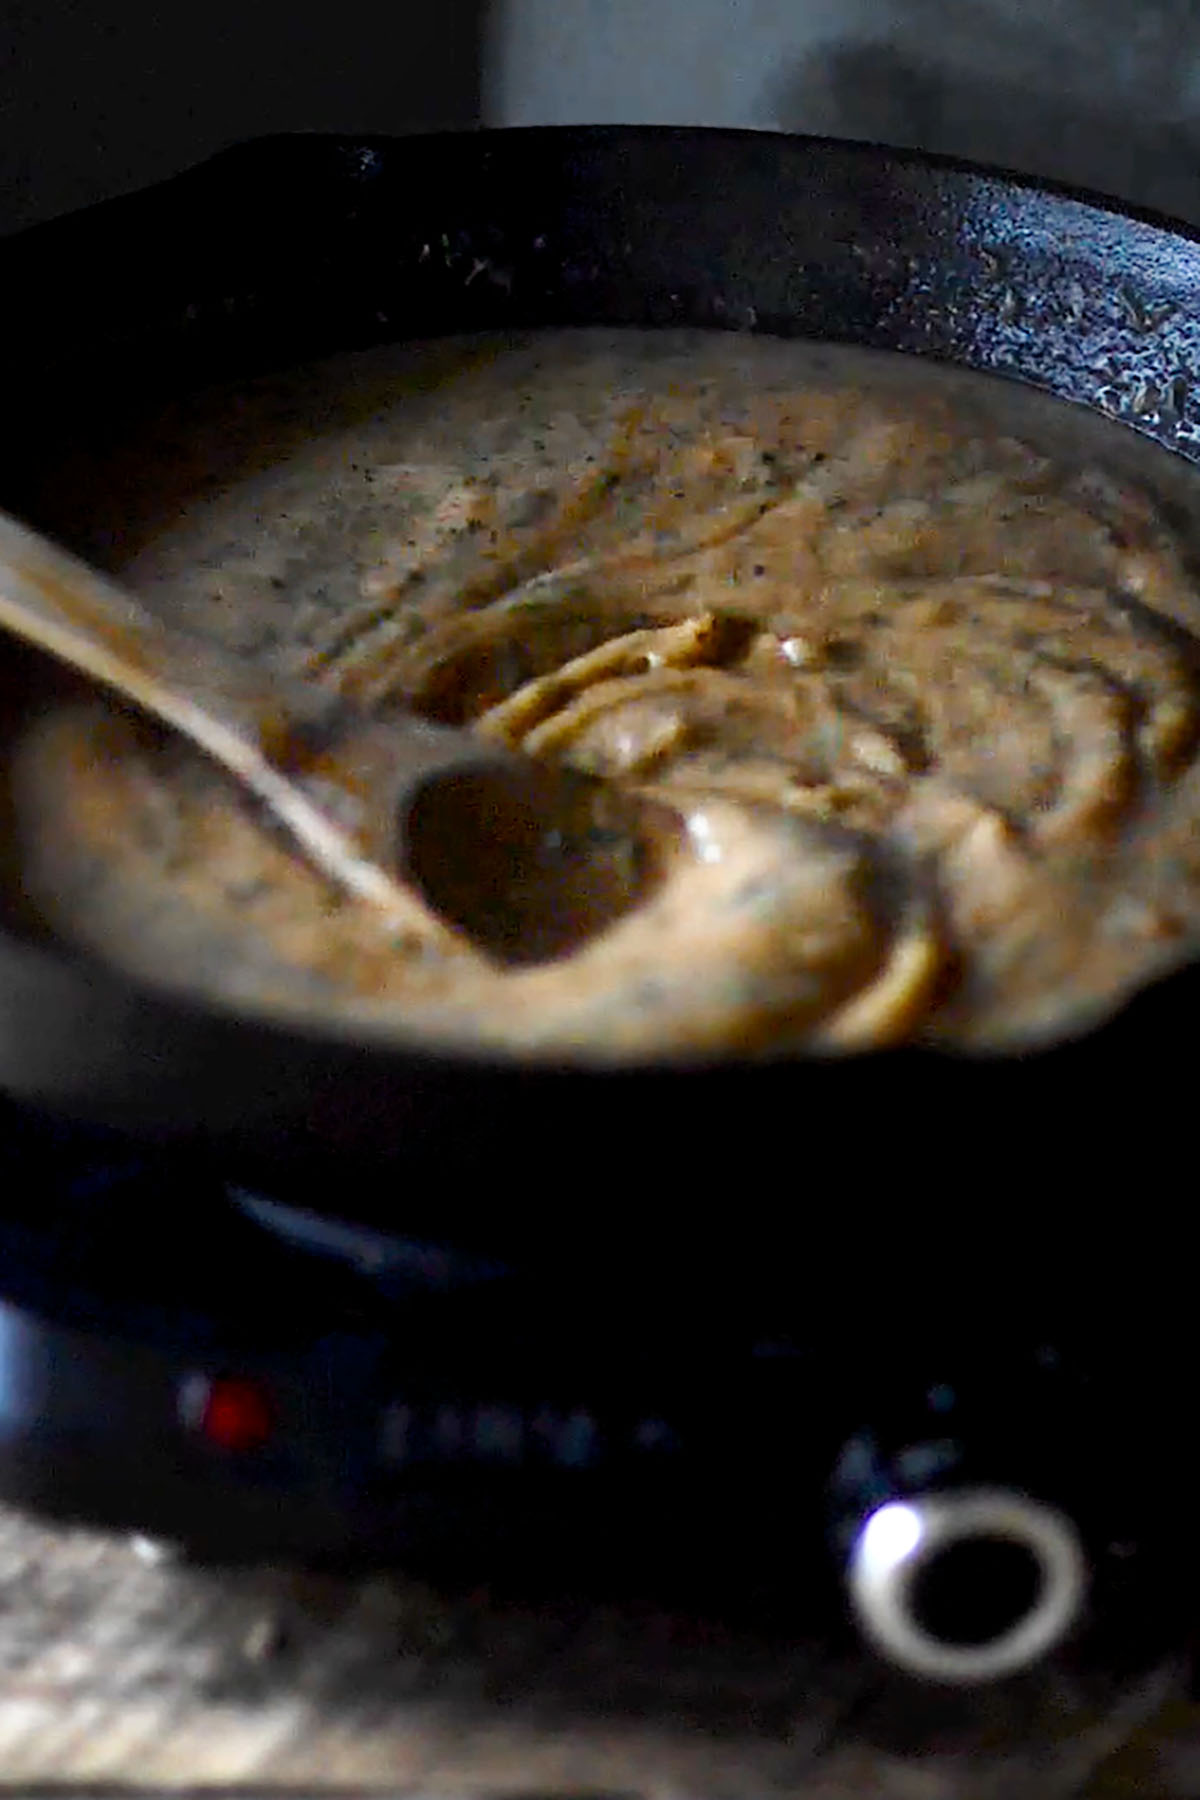 Étouffée roux being simmered and stirred in a cast iron skillet.